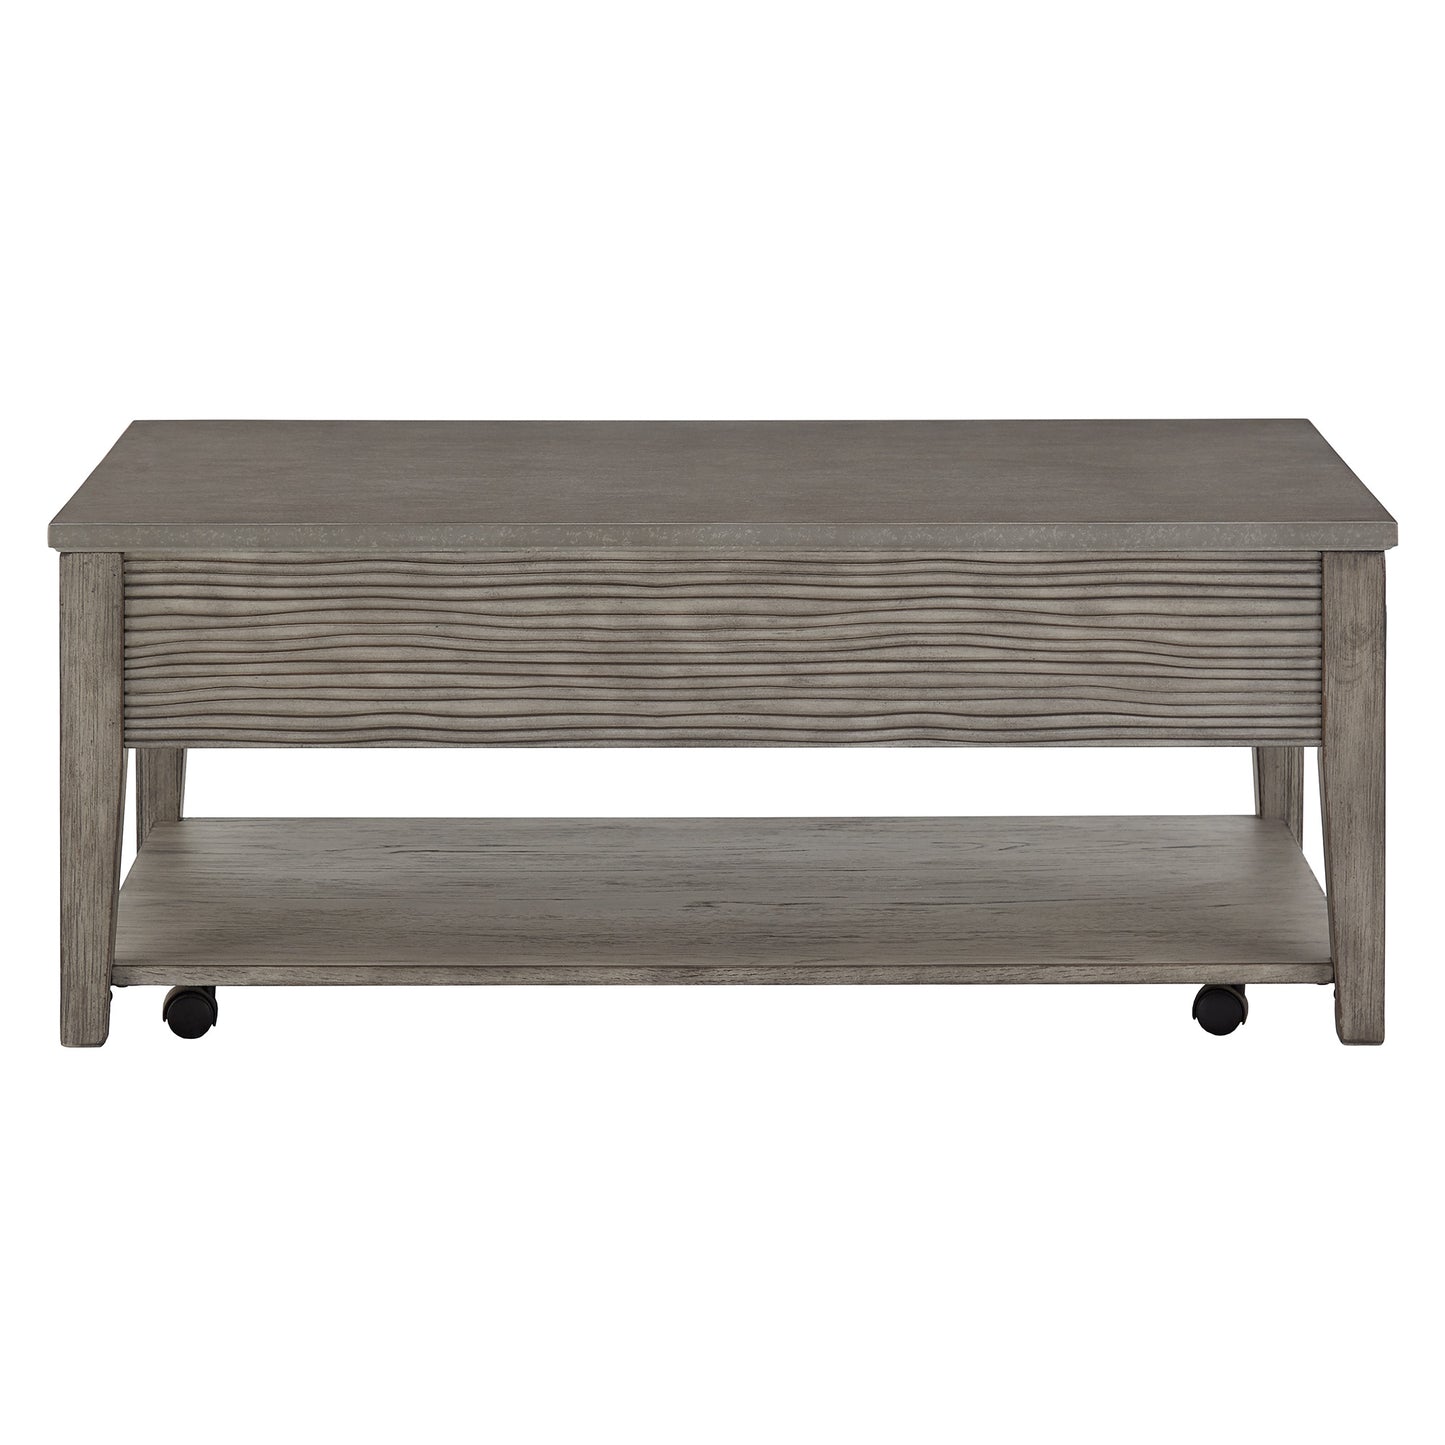 Antique Grey Finish Grey Fiber Cement Table with Self - Coffee Table